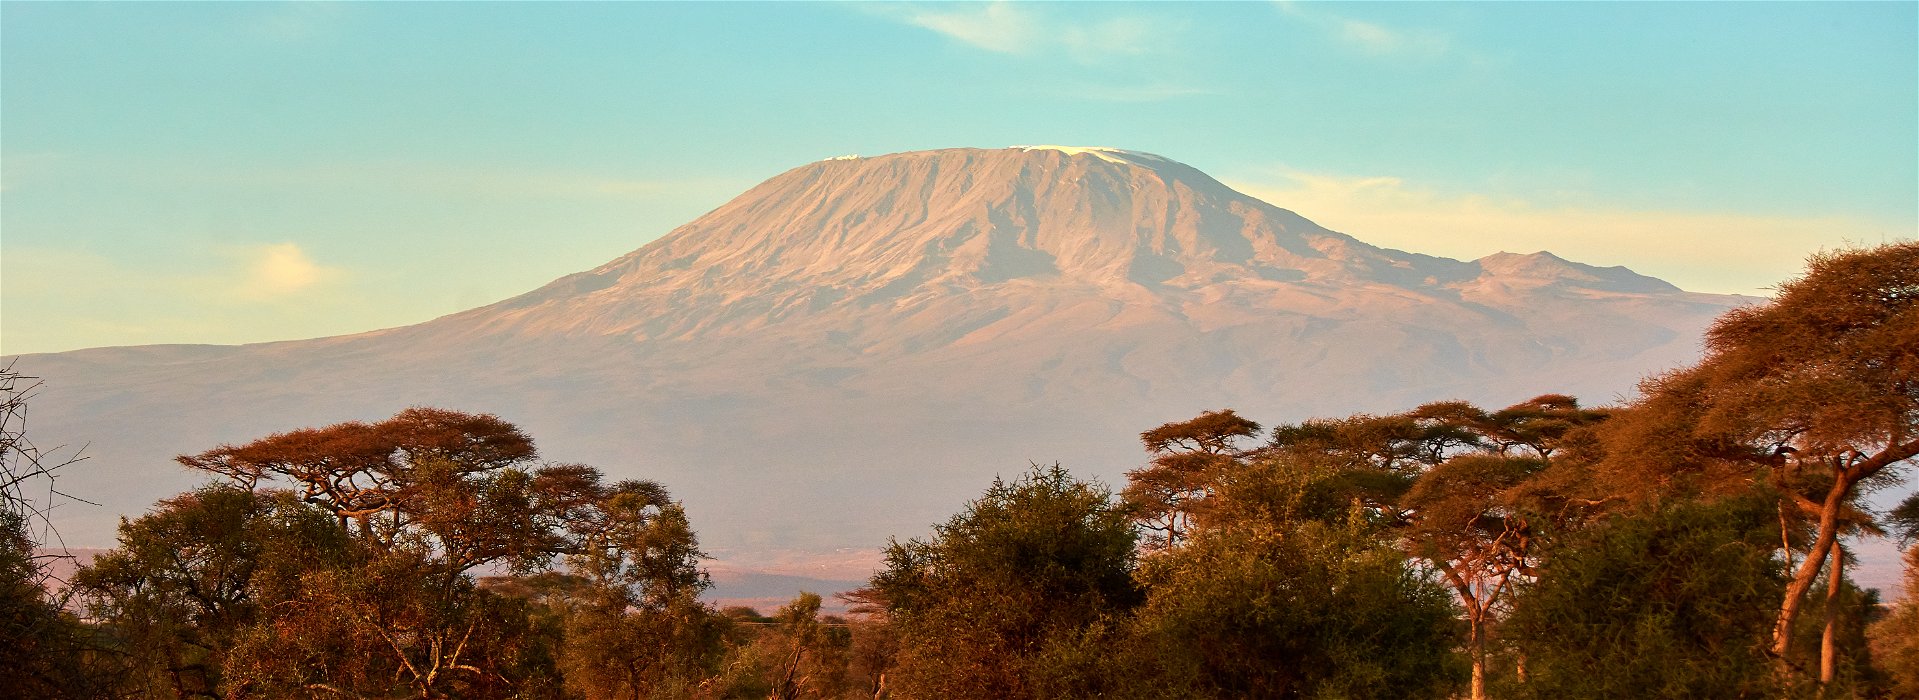 Kilimanjaro Climb - A rite of passage for father and son